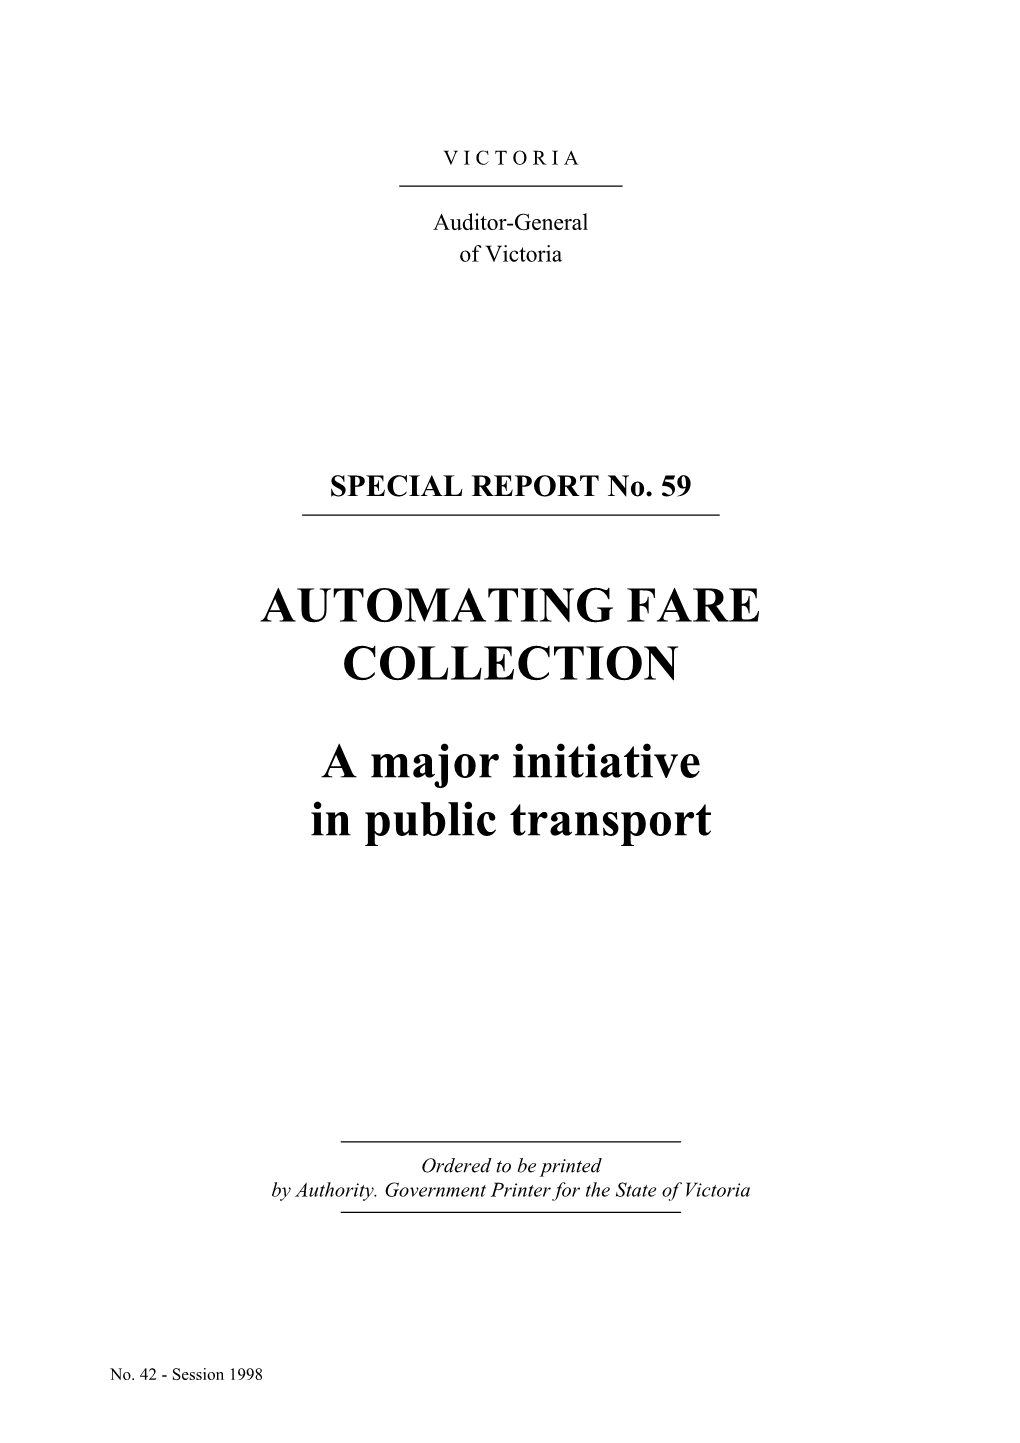 AUTOMATING FARE COLLECTION a Major Initiative in Public Transport